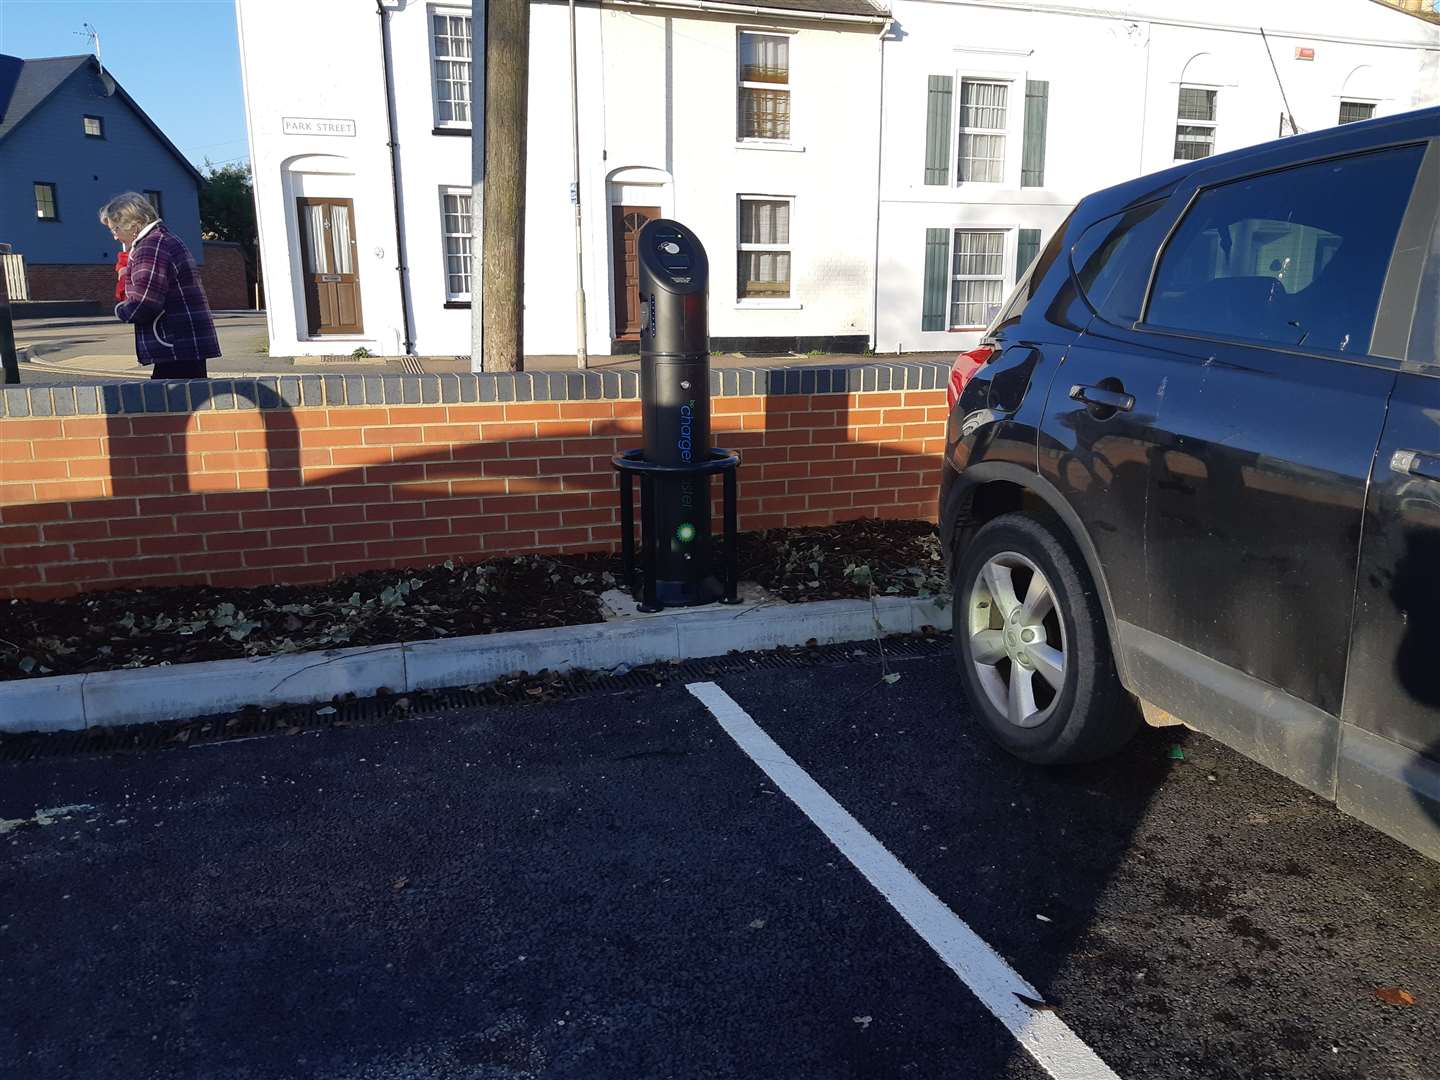 The one electric car charging point serves two bays